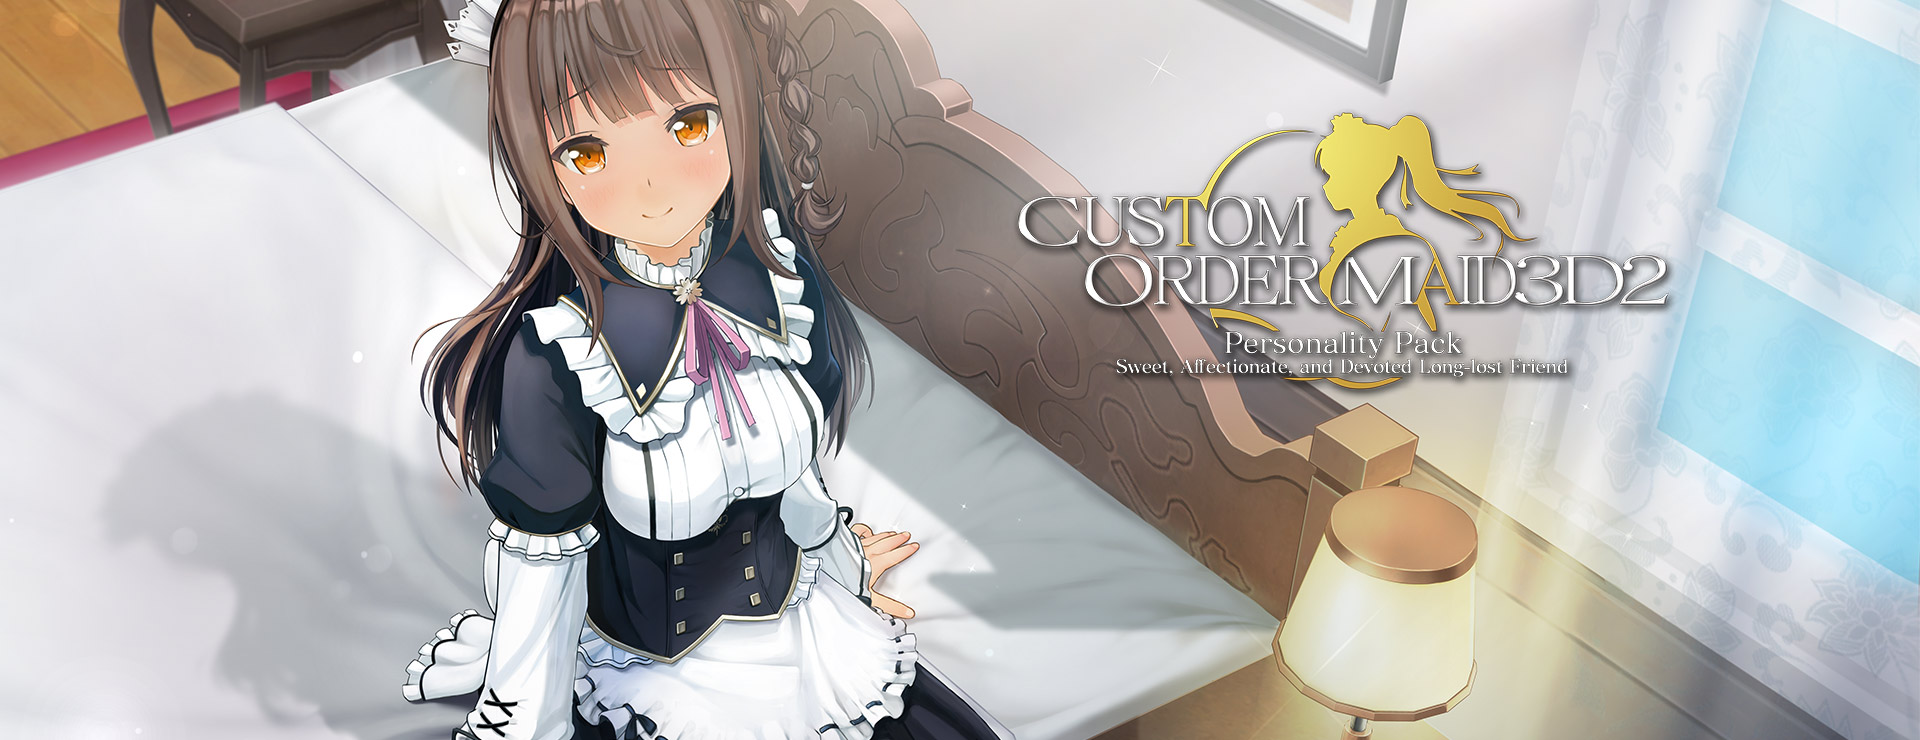 Custom Order Maid 3D 2 - Sweet, Affectionate, and Devoted Long-Lost Friend DLC - 仿真游戏 遊戲